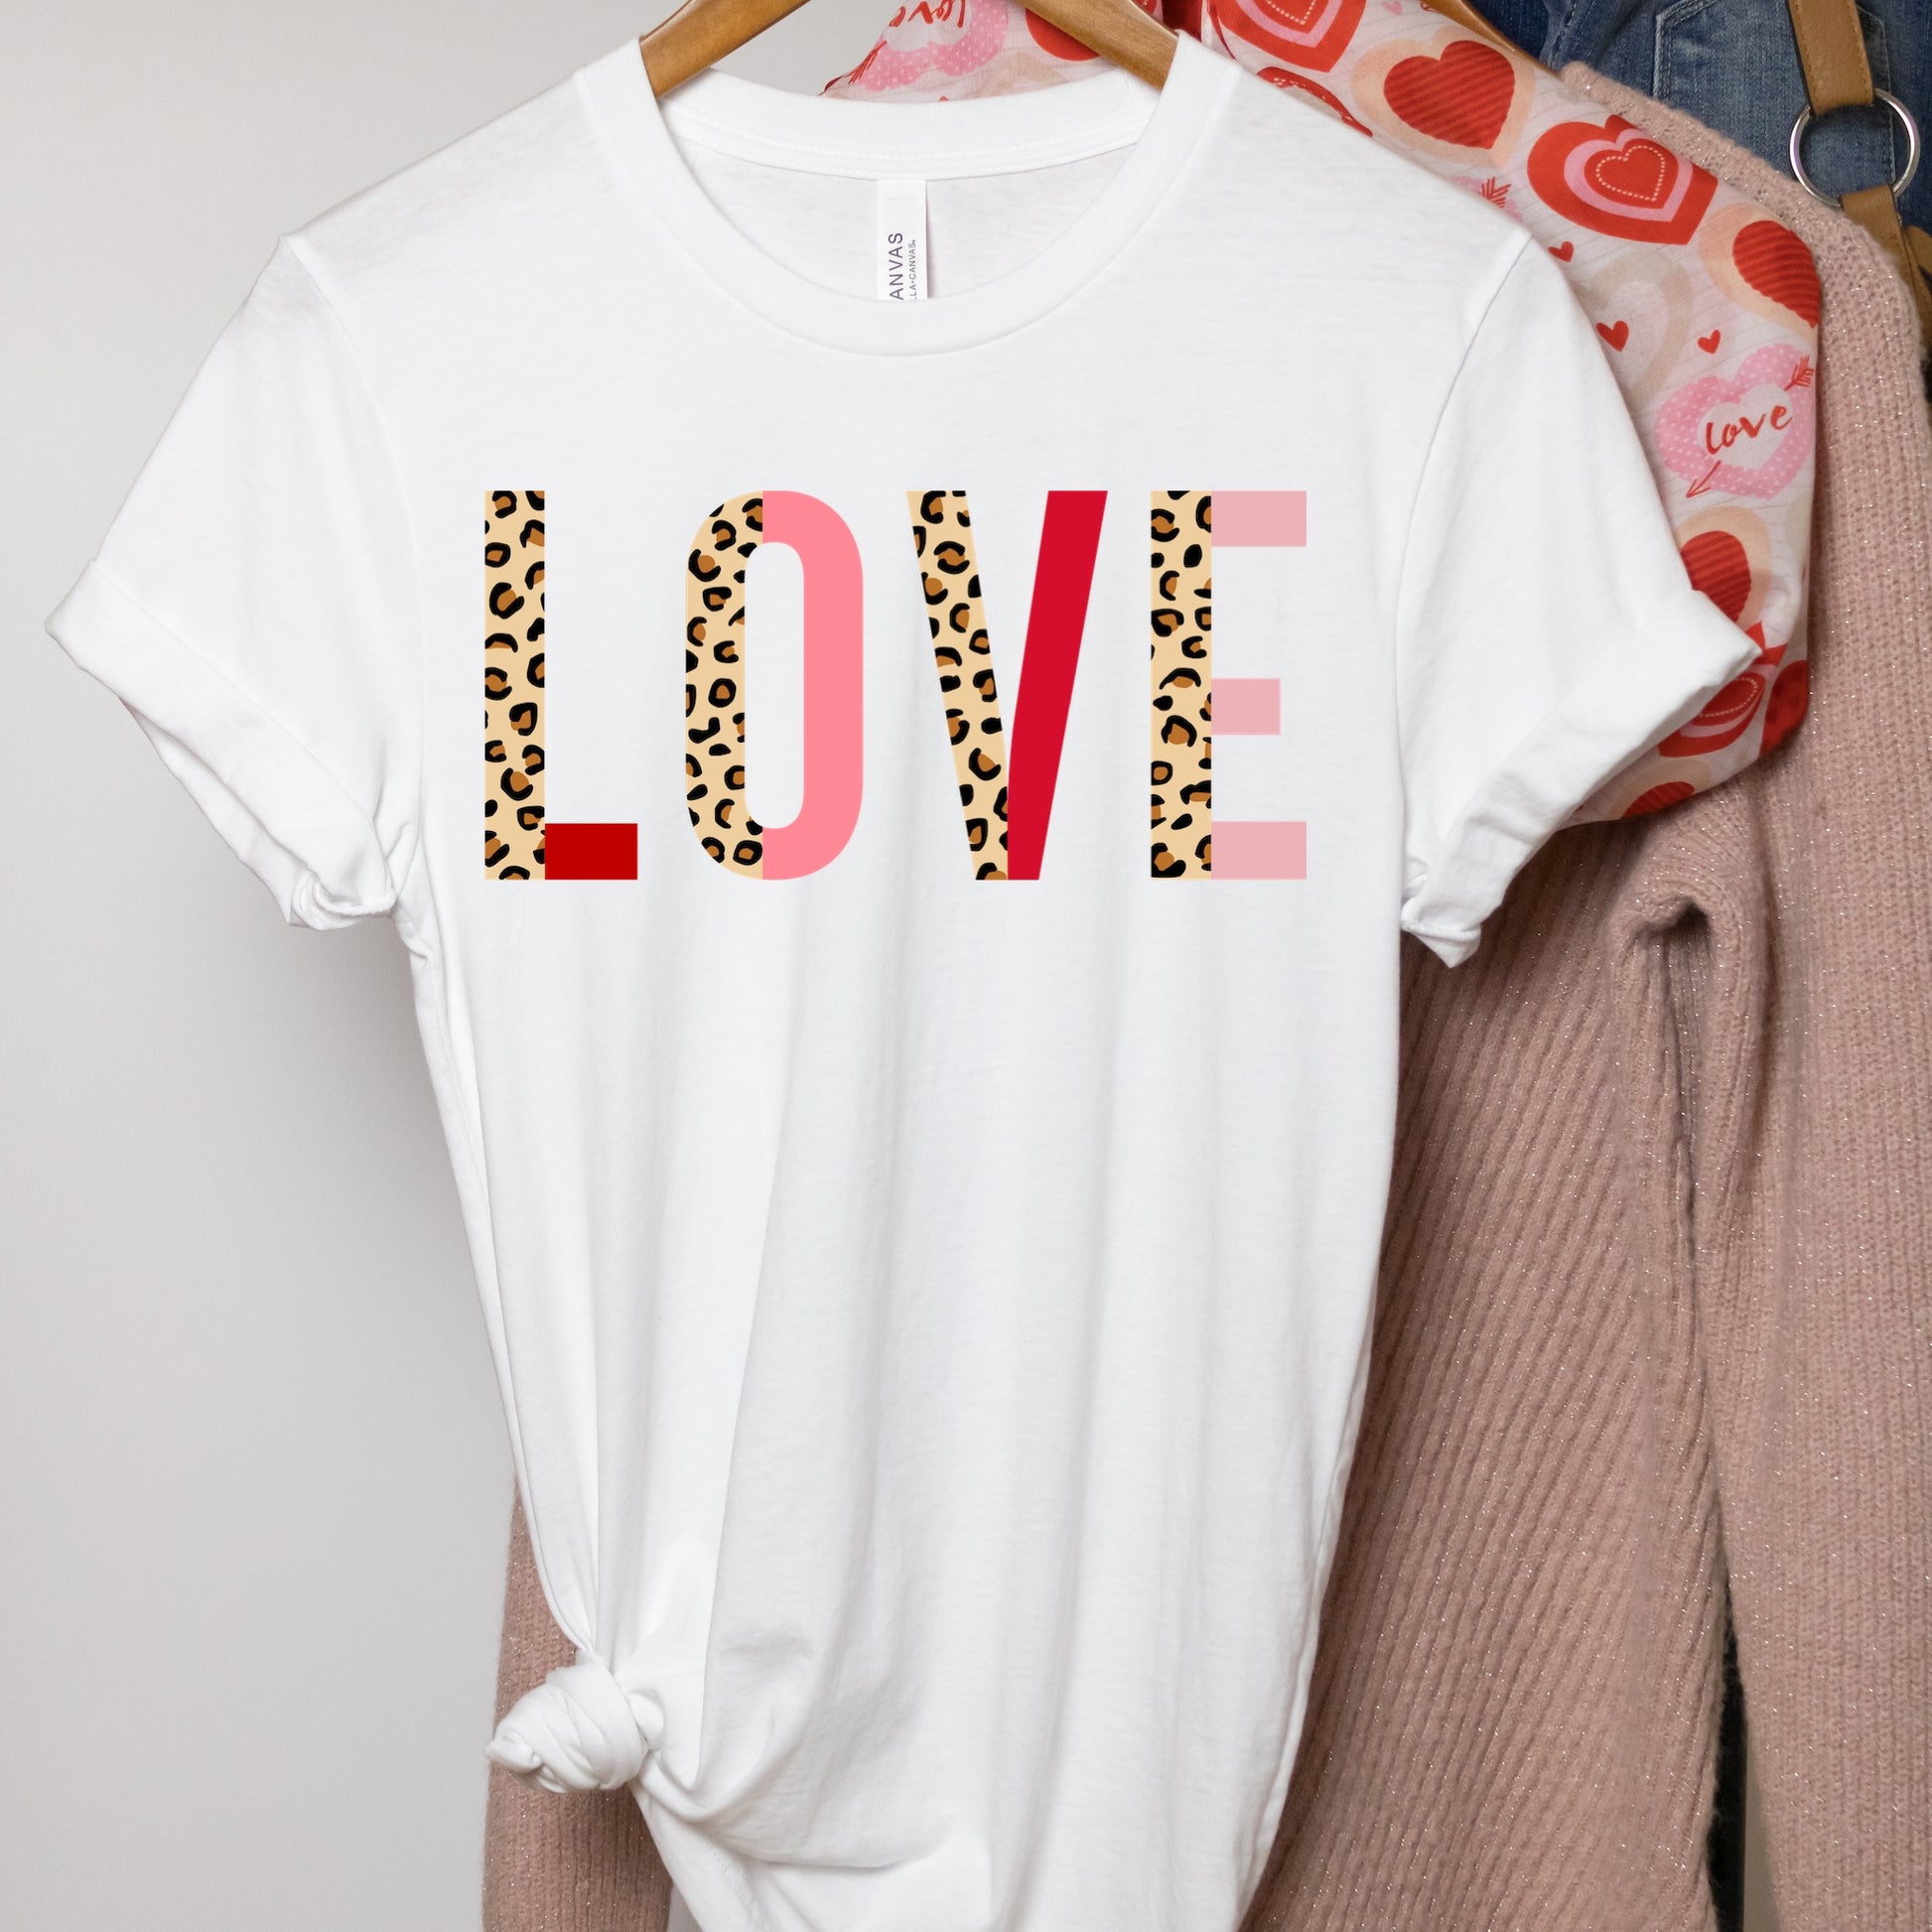 LOVE Leopard Print Iron On Transfer with Red and Pink Accents - DTF Transfer - Sublimation Transfer 